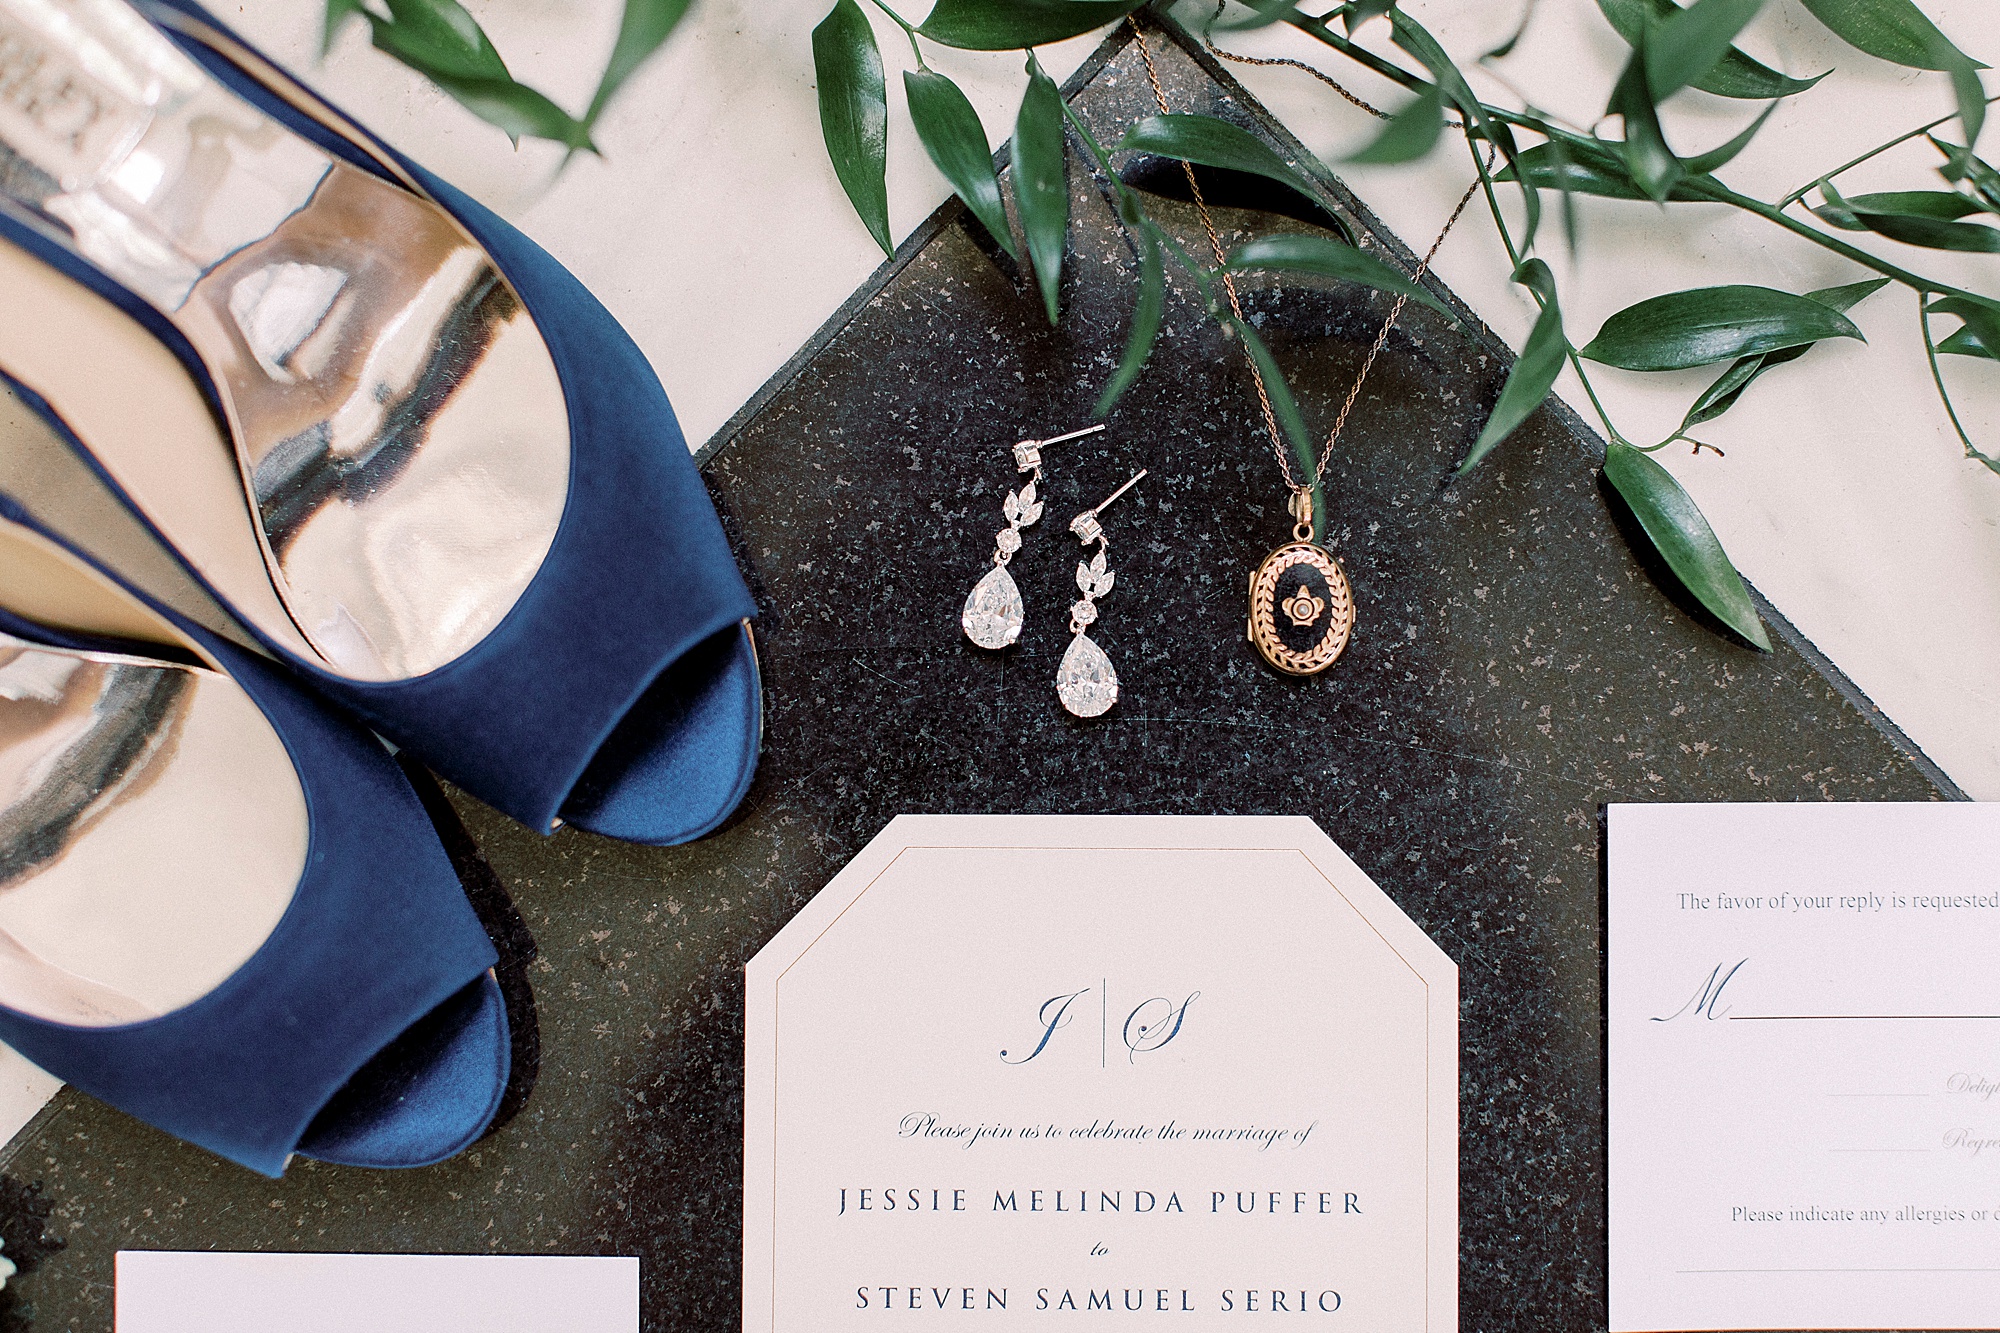 details for Separk Mansion wedding day with blue shoes and classic invitation suite